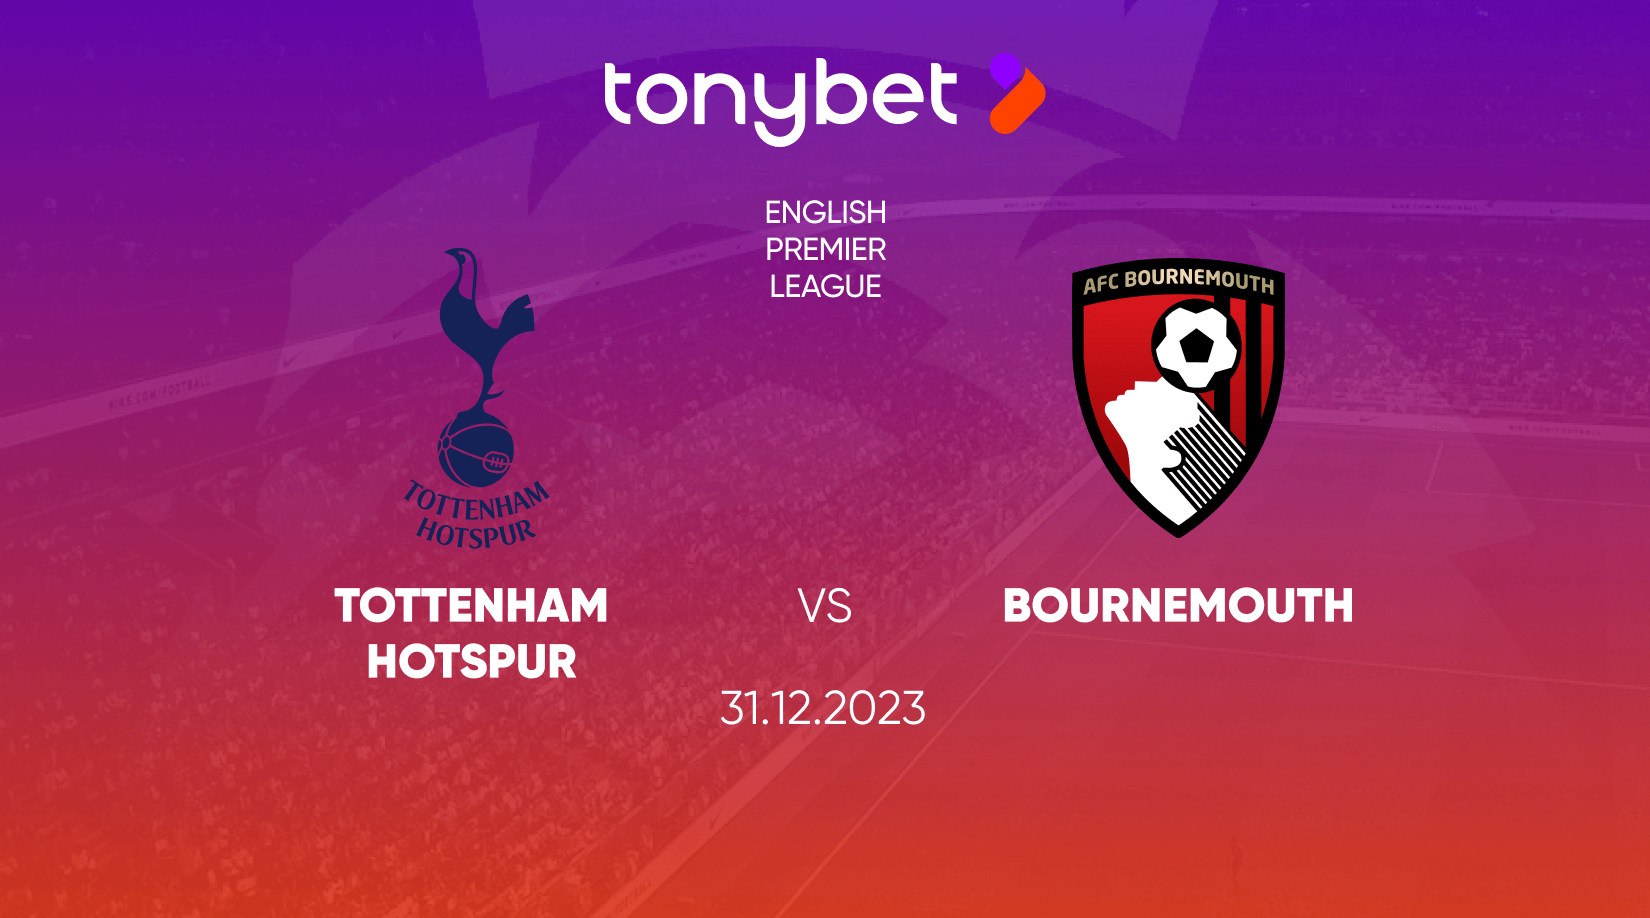 Tottenham Hotspur vs Bournemouth, Odds and Betting Tips 31/12/2023